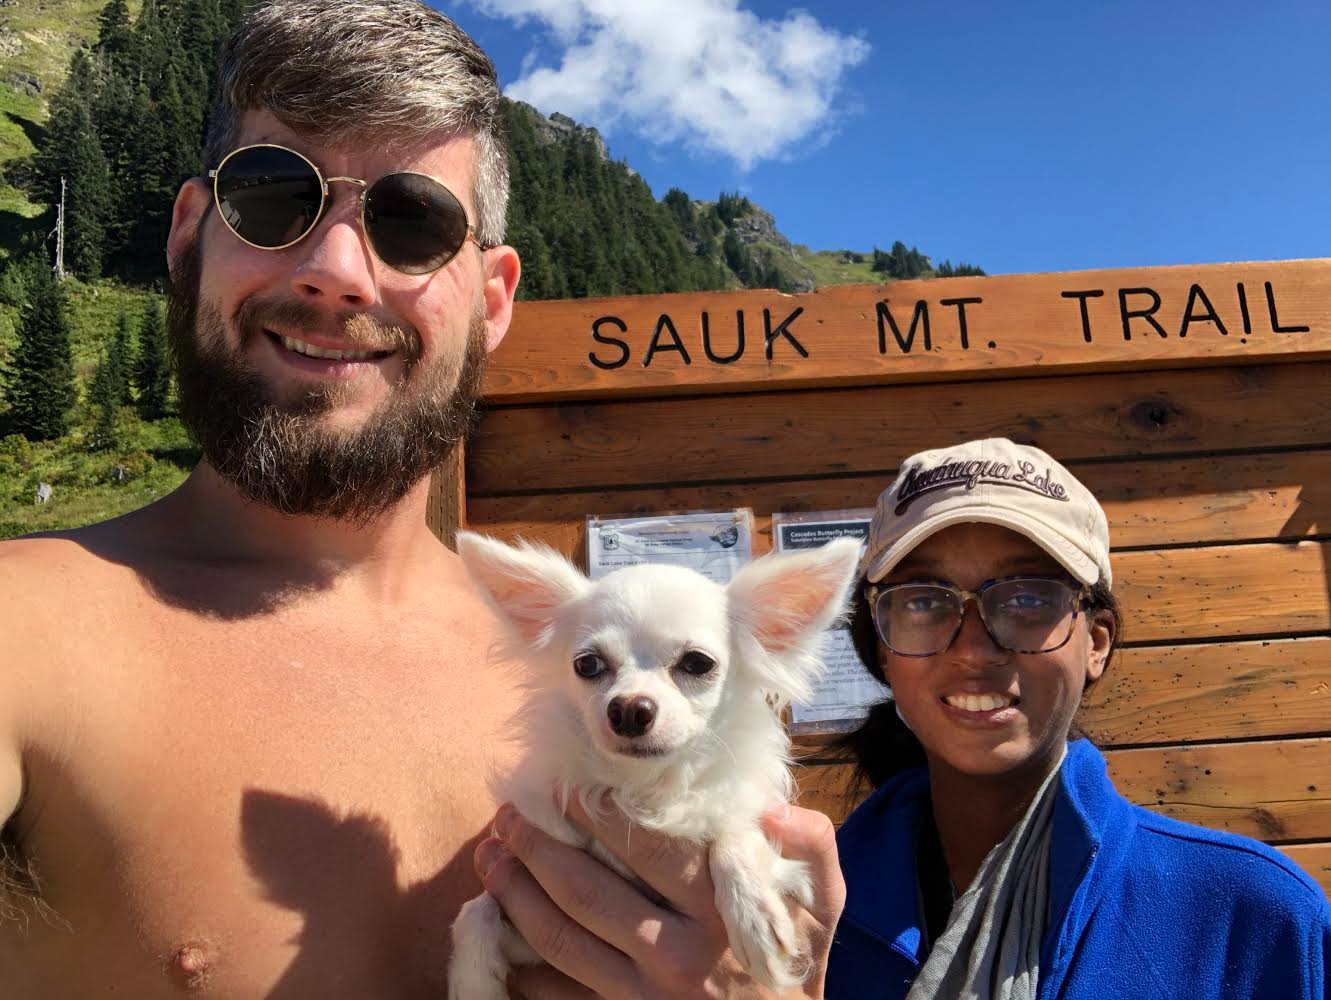 Raele, her boyfriend (Devin), and his late dog (Teko) at the trailhead for Sauk Mountain in Washington in August of 2018. This was Raele's first time hiking a mountain, and she did so a year and a half after being diagnosed with pulmonary hypertension.